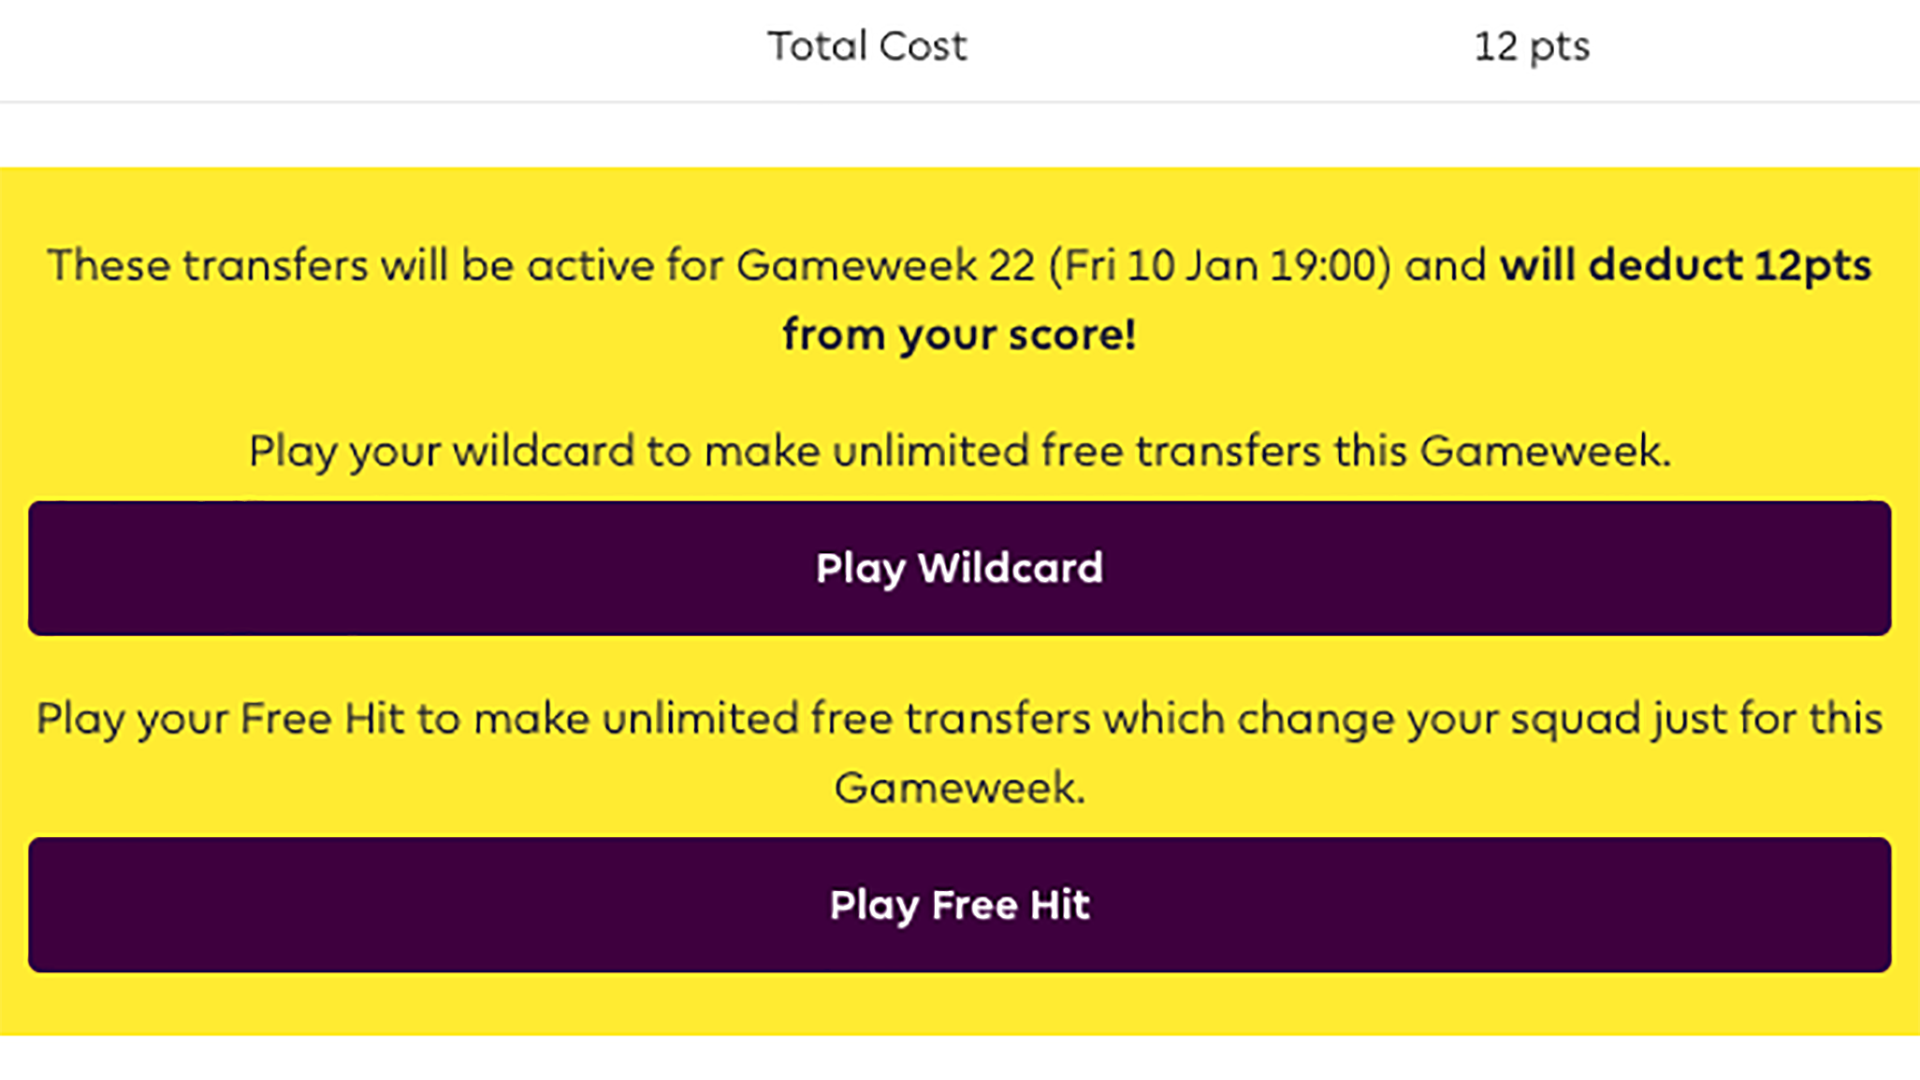 Free hit fpl meaning